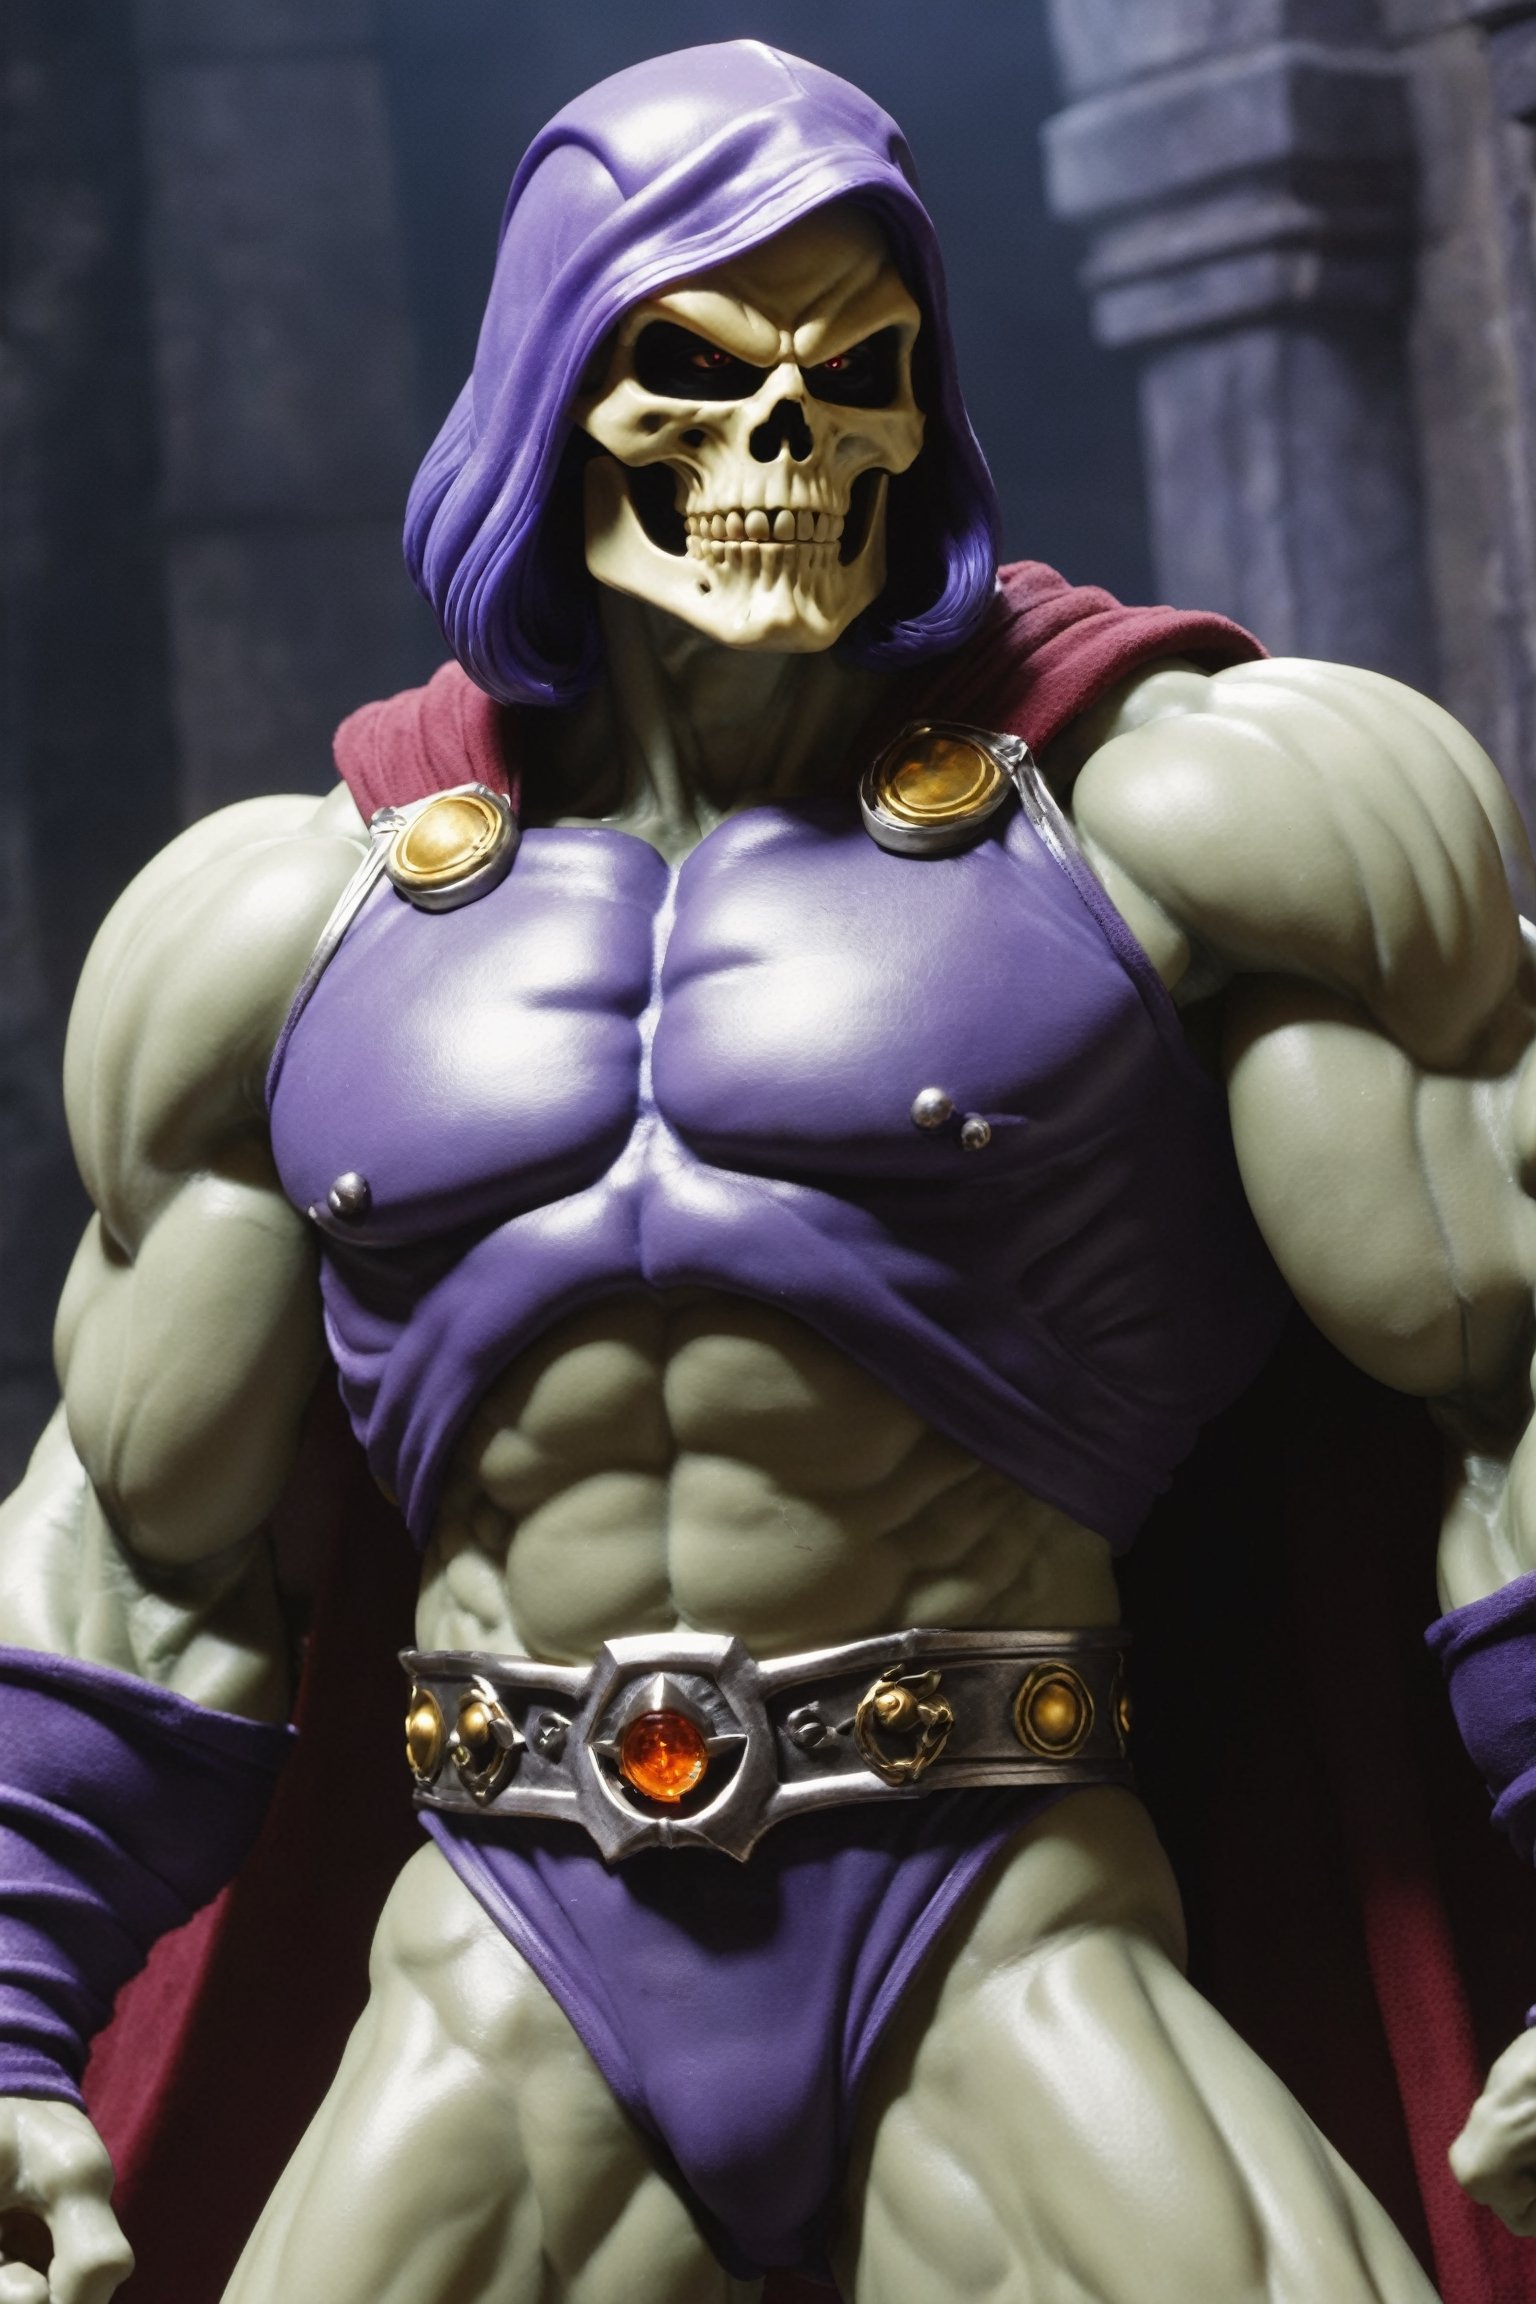 A mastermind of malevolence, Skeletor's muscular stature strikes fear into the hearts of his enemies. His bony countenance grins with wicked satisfaction as he schemes within the dark chambers of Castle Grayskull. Skeletor's malefic plans are backed by his mastery of dark arts, making him an enduring threat to the realms of good.